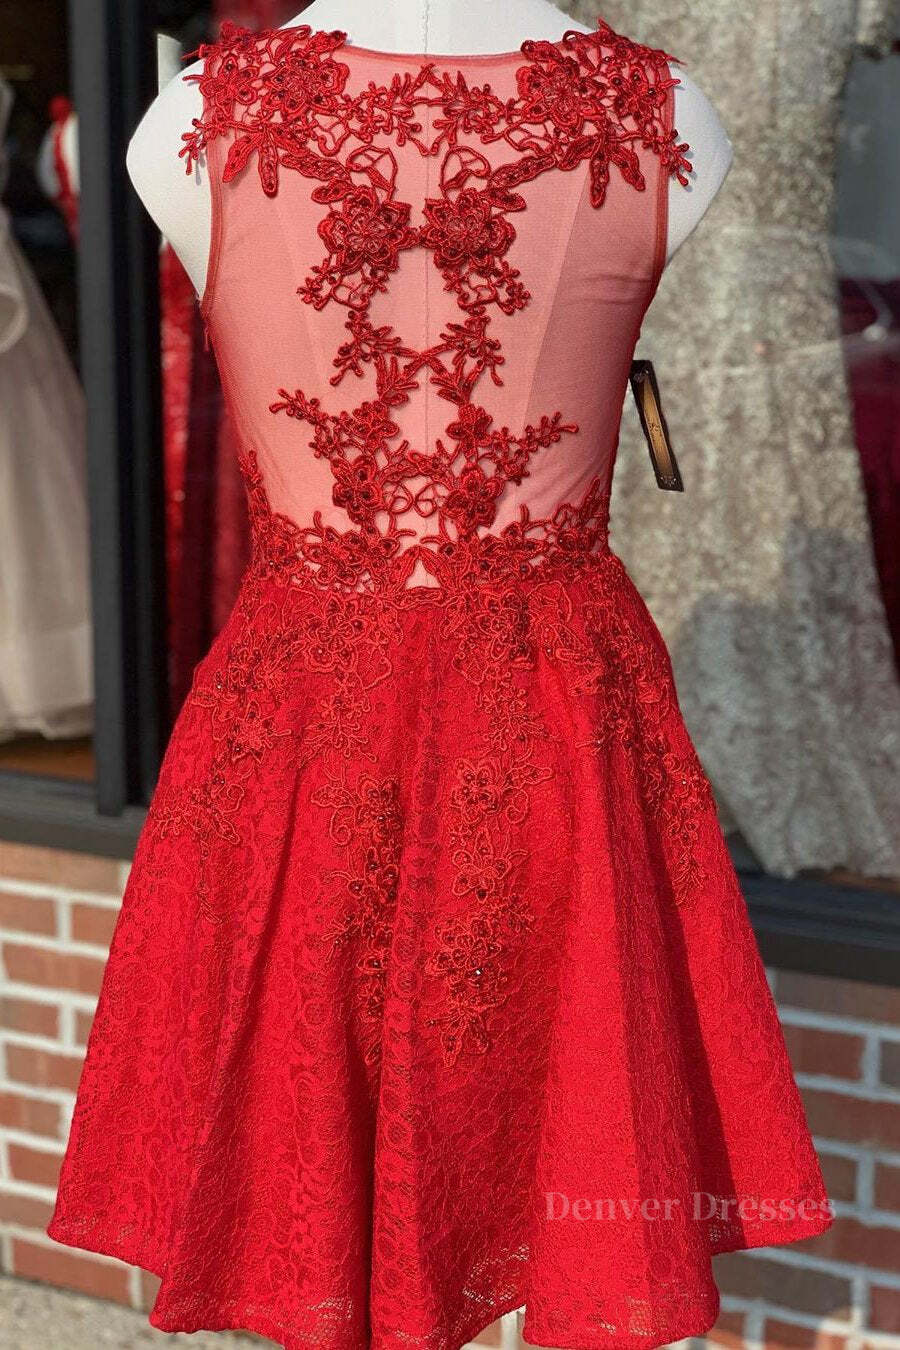 Bride Dress, A Line V Neck Short Red Lace Prom Dress, Red Lace Formal Graduation Homecoming Dress